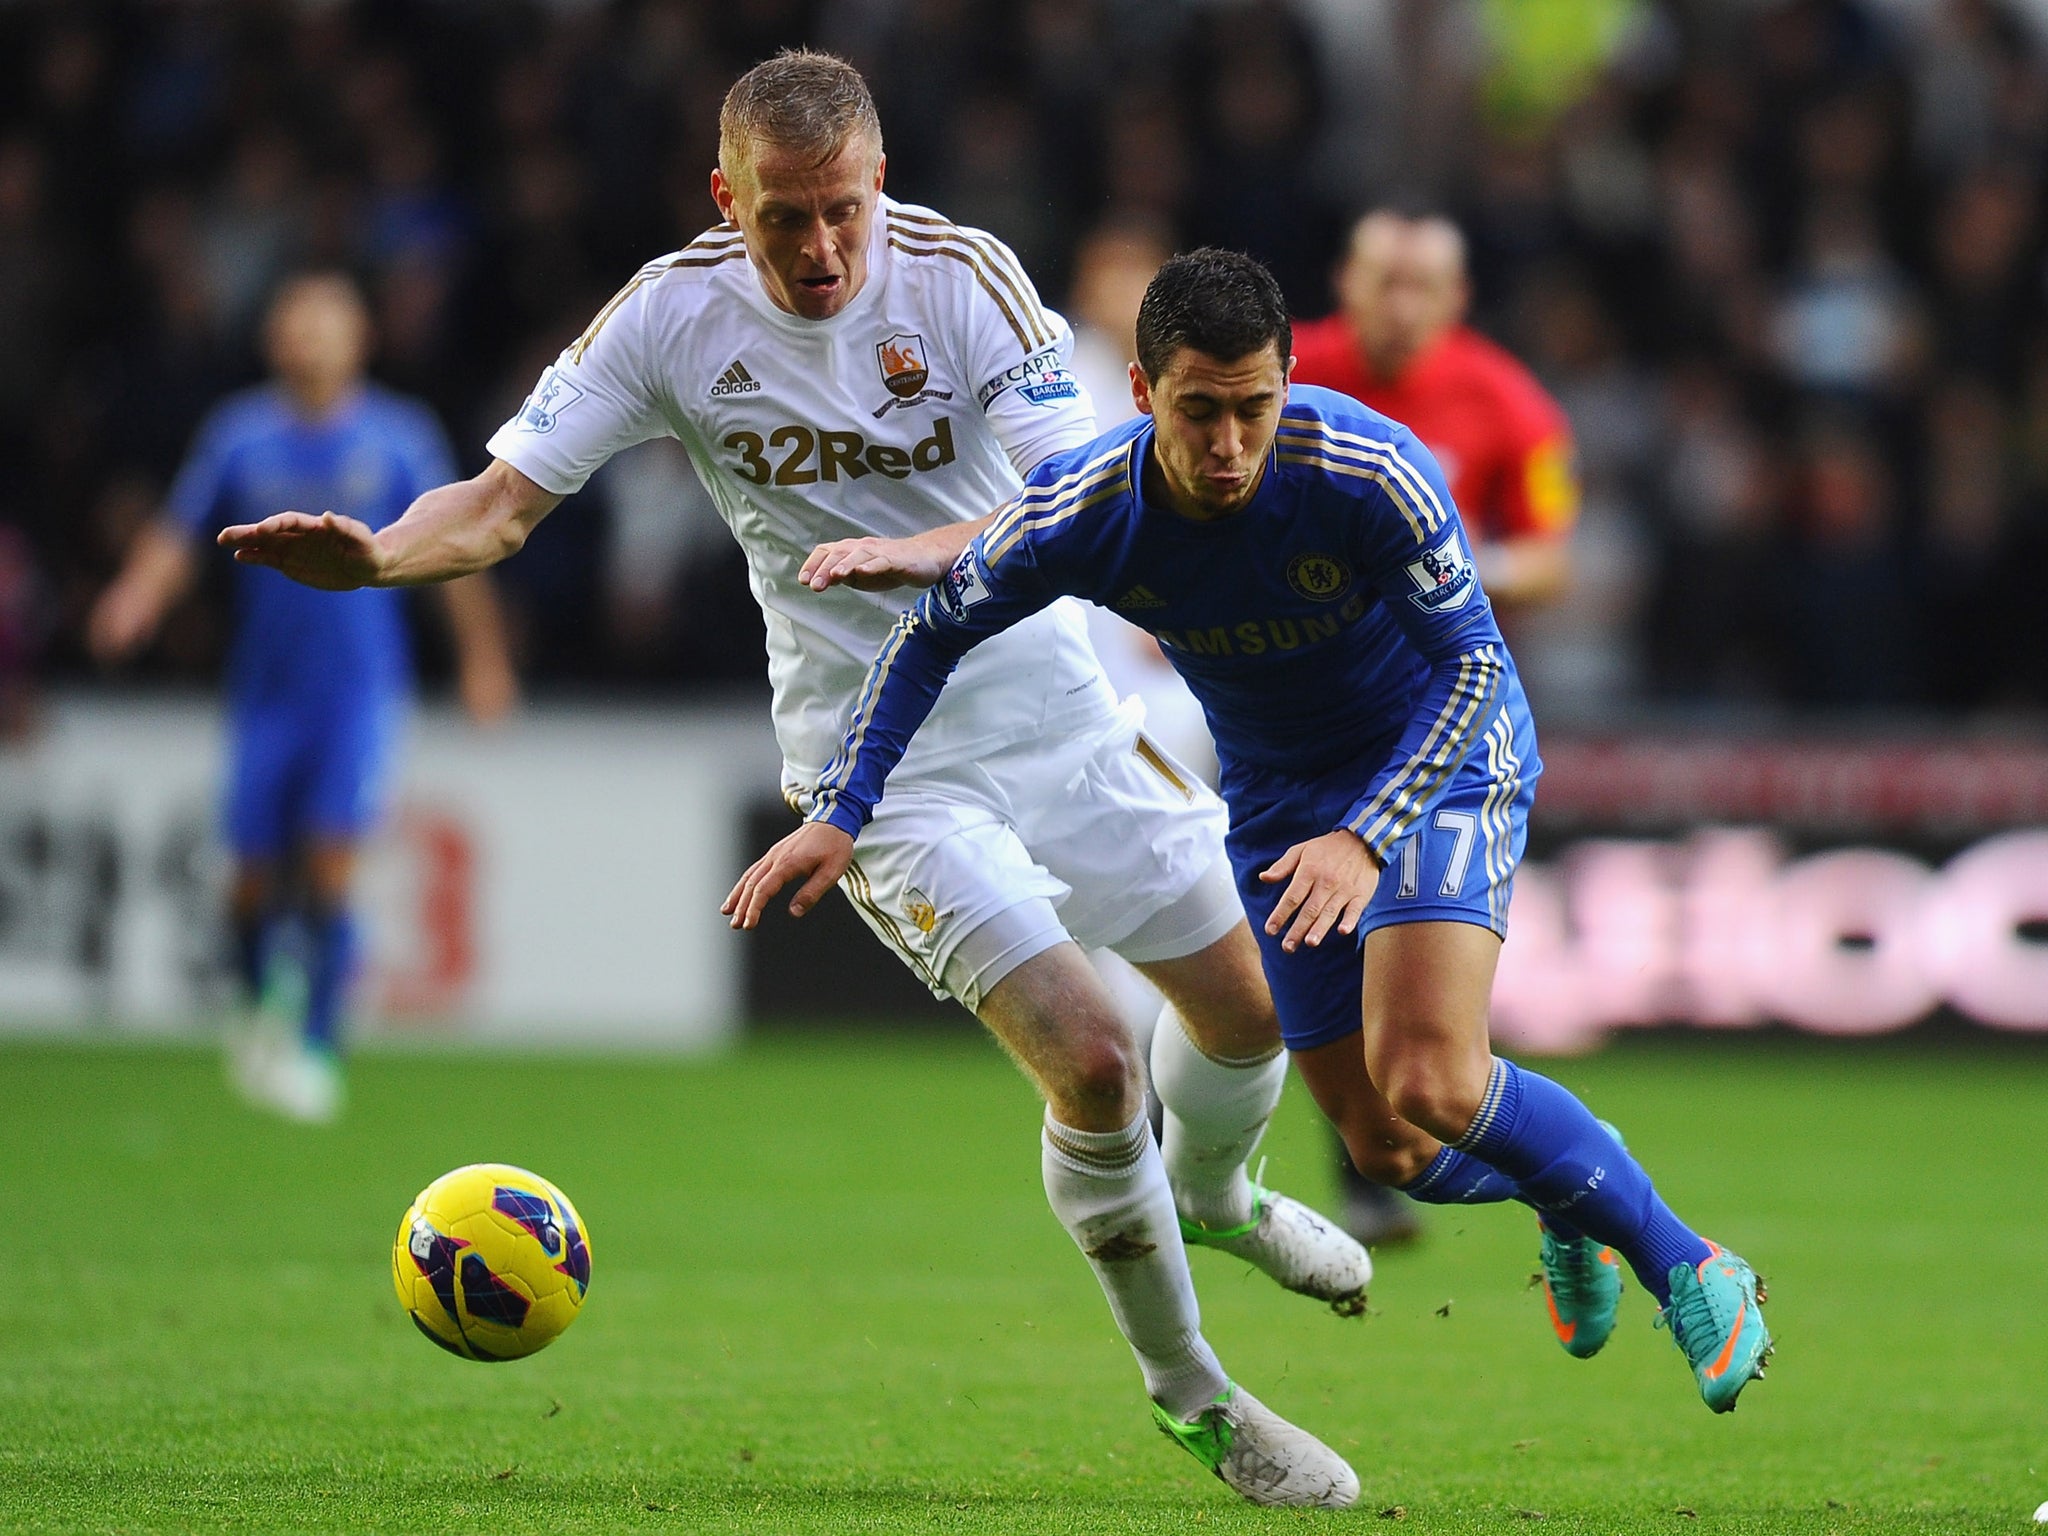 Garry Monk tackles Eden Hazard, of Chelsea, in the Premier League this month